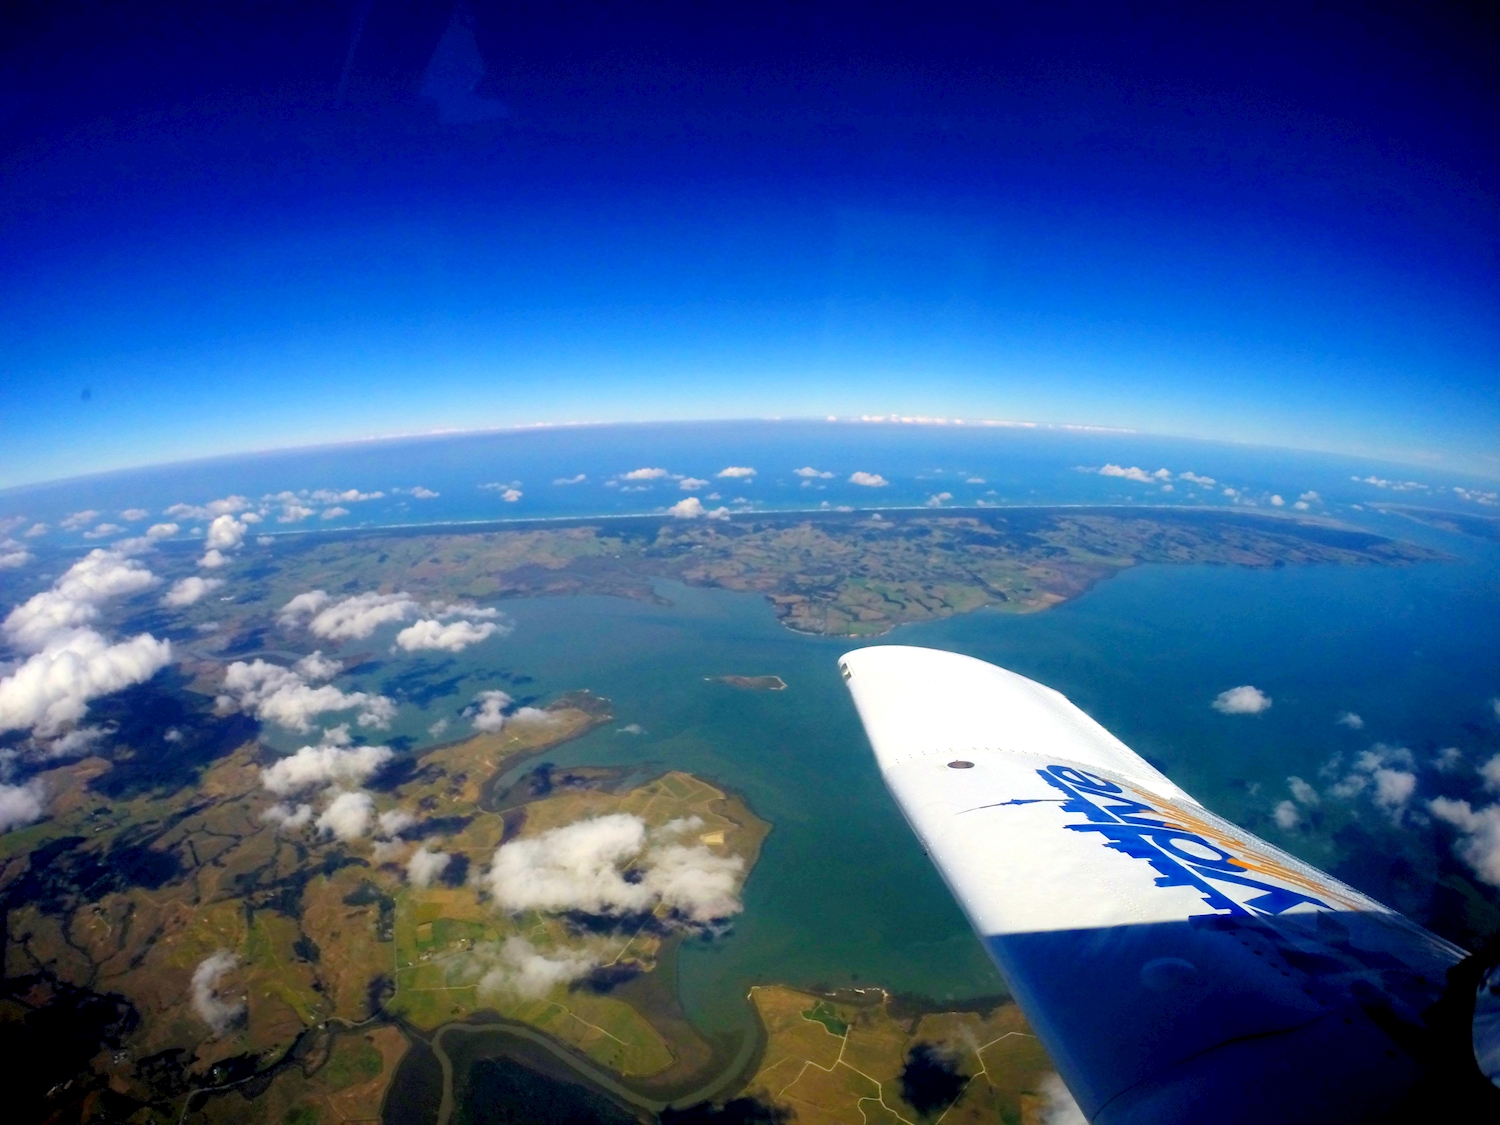 Tandem Skydive in Auckland from 16,000 ft